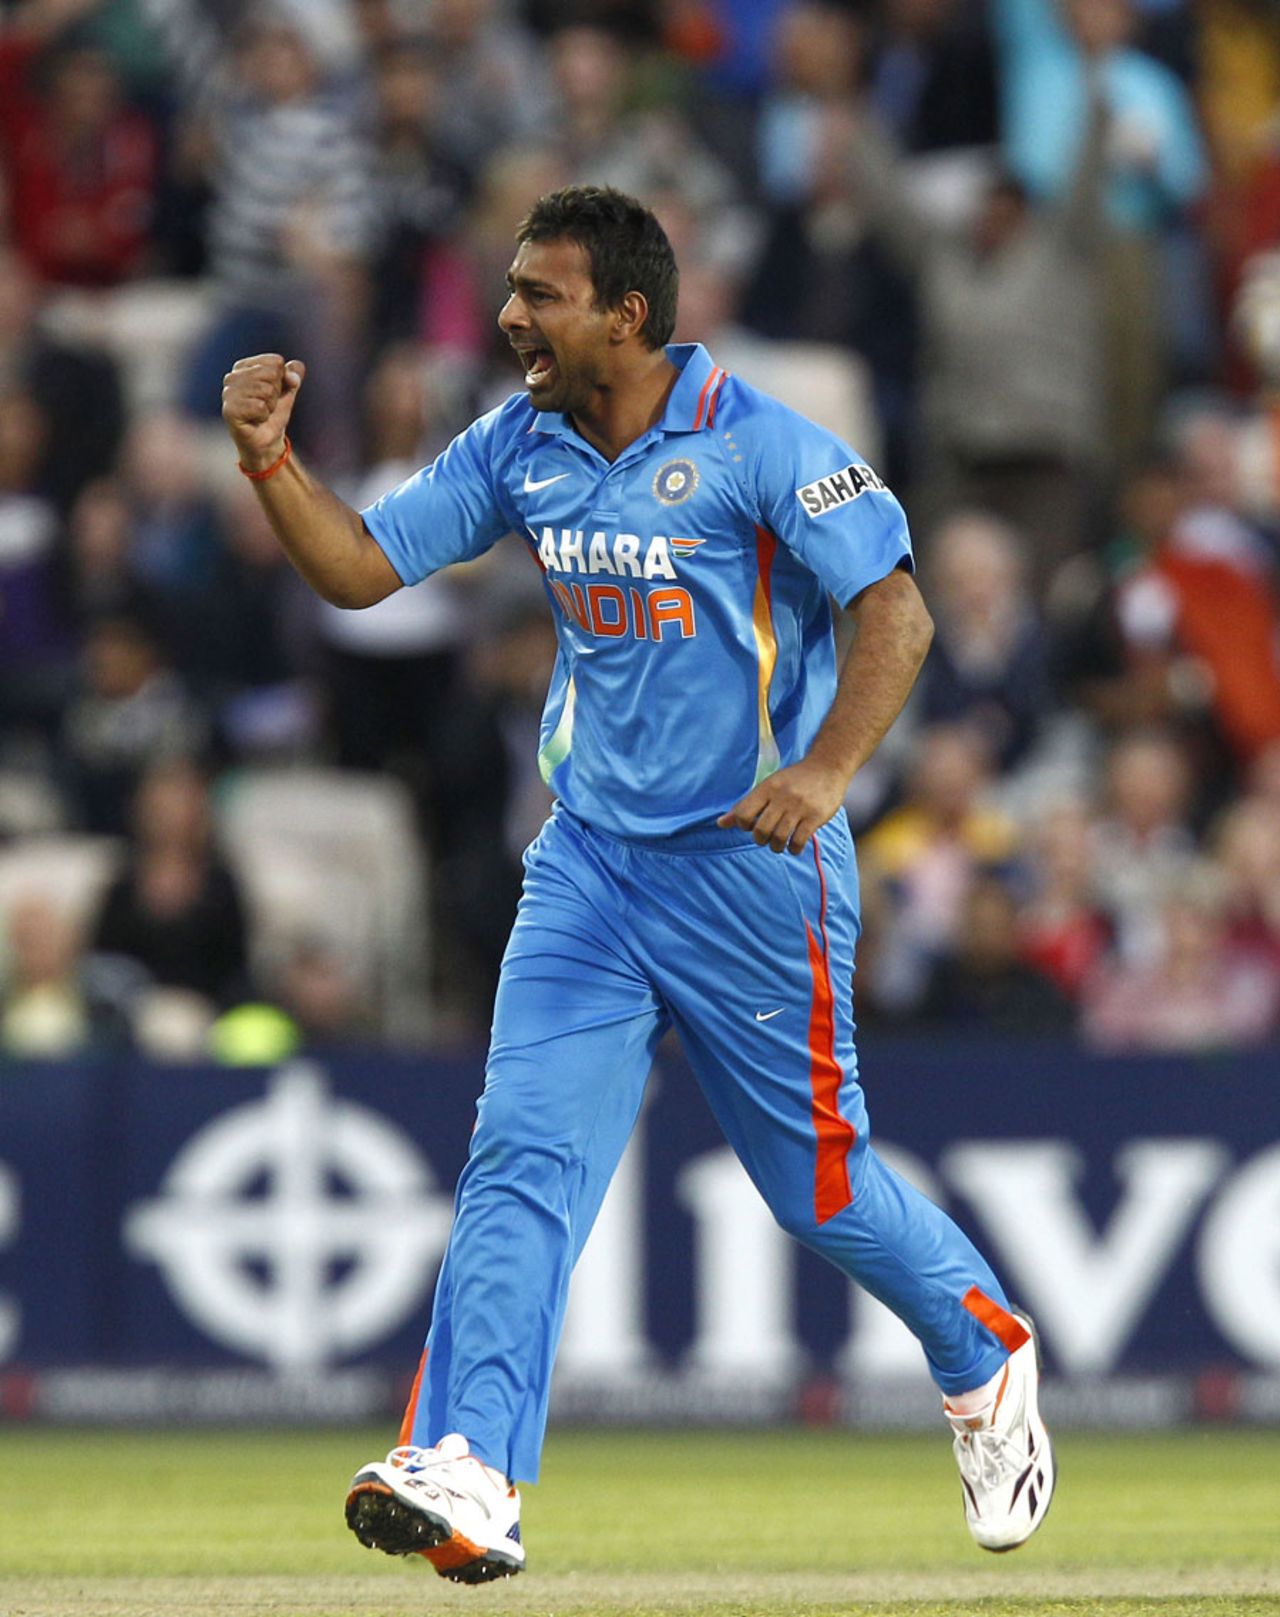 Praveen Kumar struck in his first over, England v India, Twenty20, Old Trafford, August 31, 2011